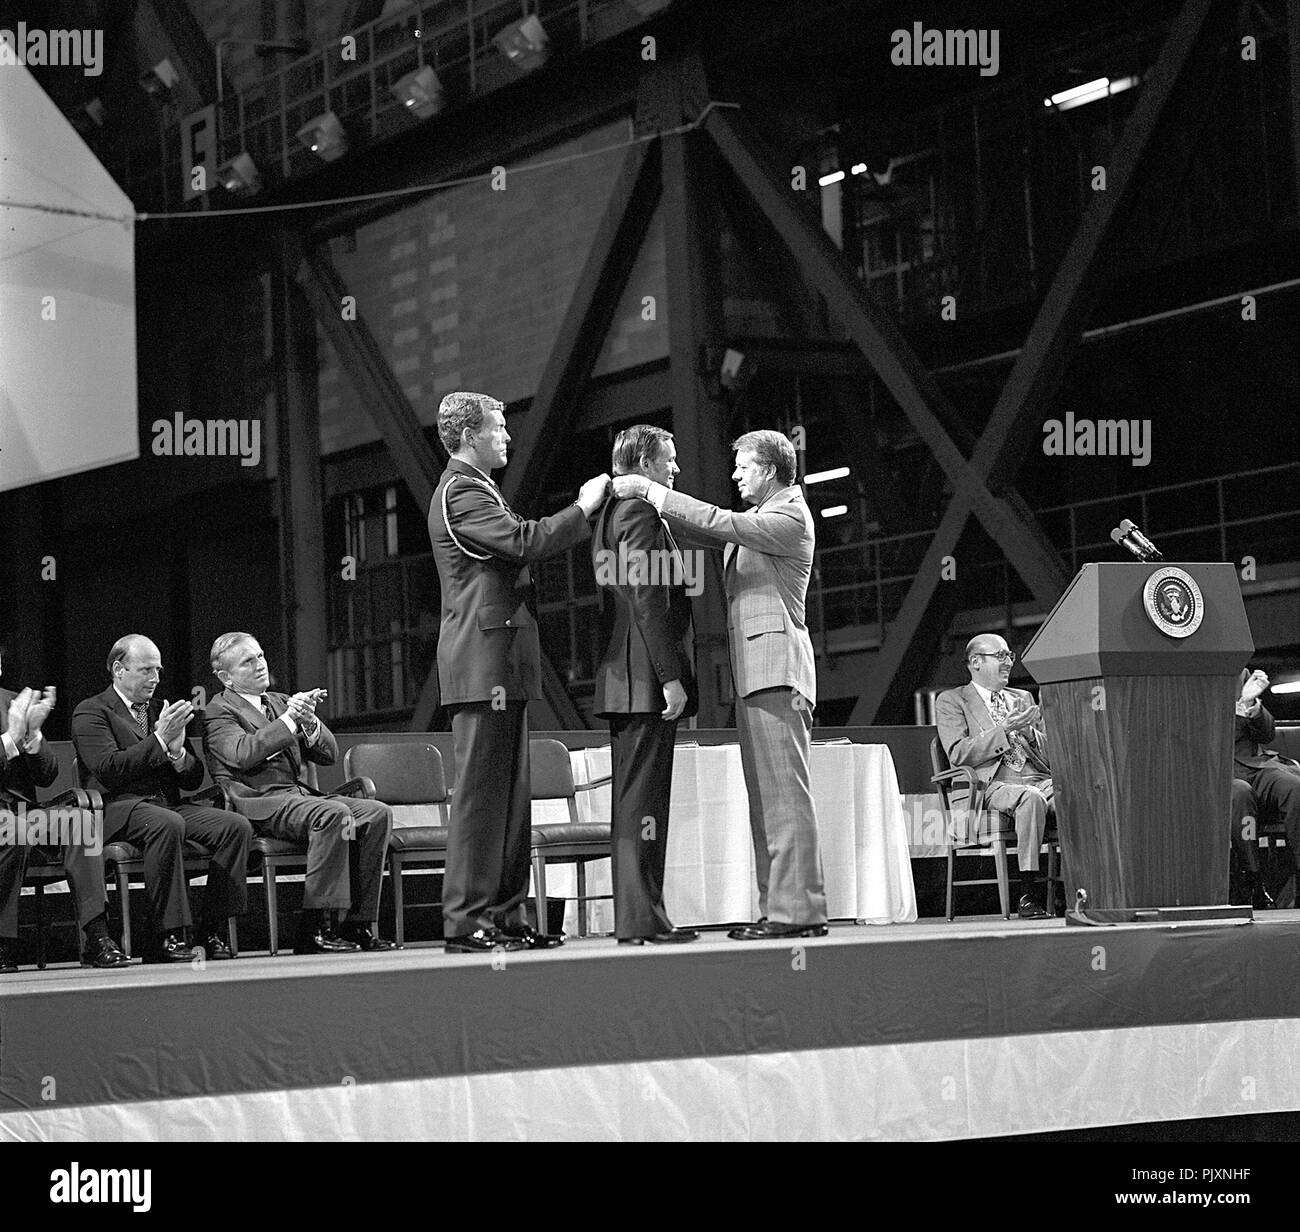 Cape Canaveral, FL - (FILE) -- Astronaut Neil A. Armstrong receives the first Congressional Space Medal of Honor from United States President Jimmy Carter, assisted by Captain Robert Peterson on October 1, 1978. Armstrong, one of six astronauts to be presented the medal during ceremonies held in the Vehicle Assembly Building (VAB), was awarded for his performance during the Gemini 8 mission and the Apollo 11 mission when he became the first human to set foot upon the Moon. Credit: NASA via CNP /MediaPunch Stock Photo